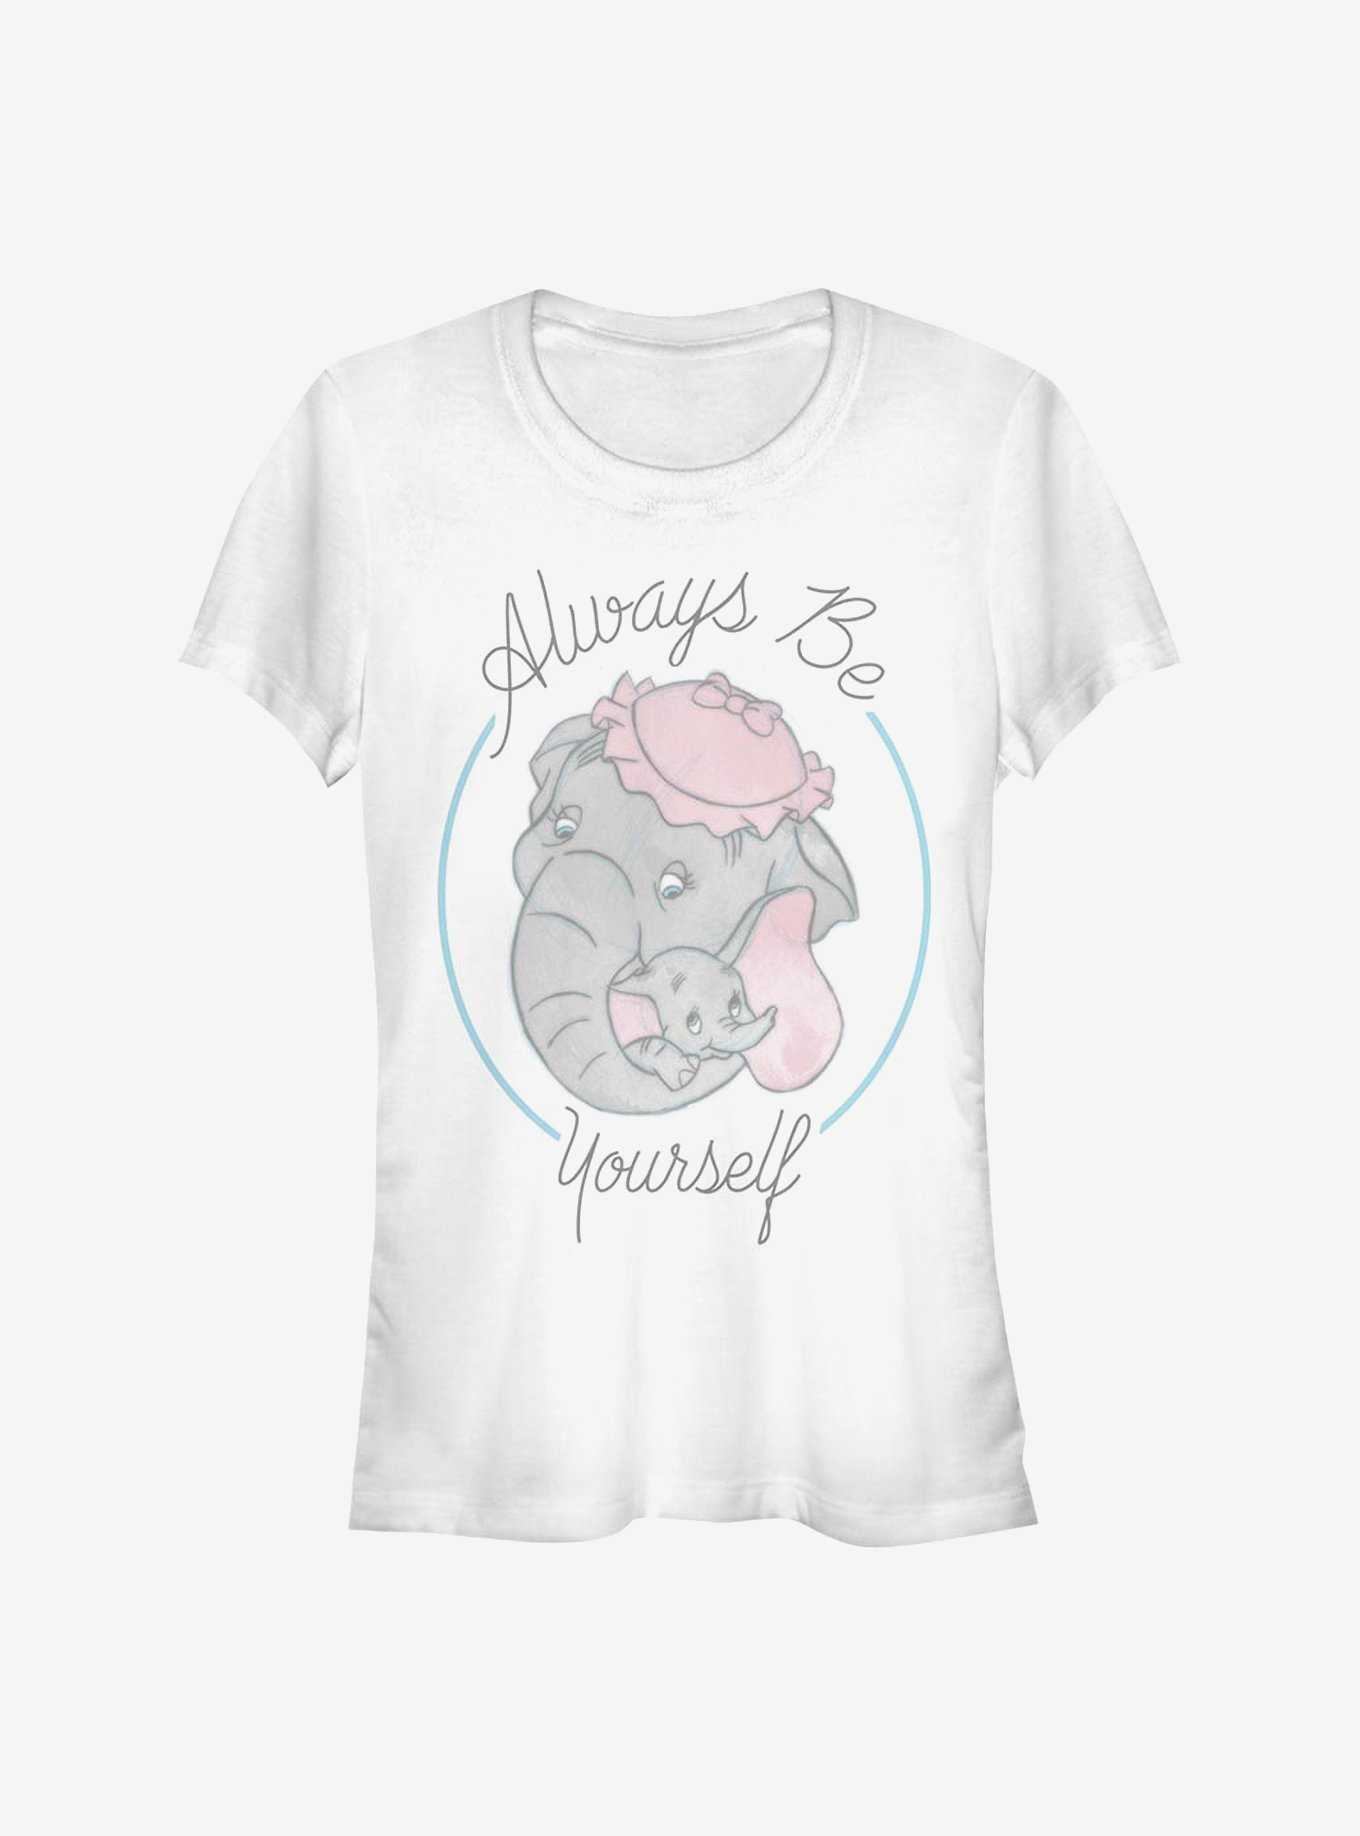 OFFICIAL Dumbo Shirts, Jewelry & Hot | Merchandise Topic